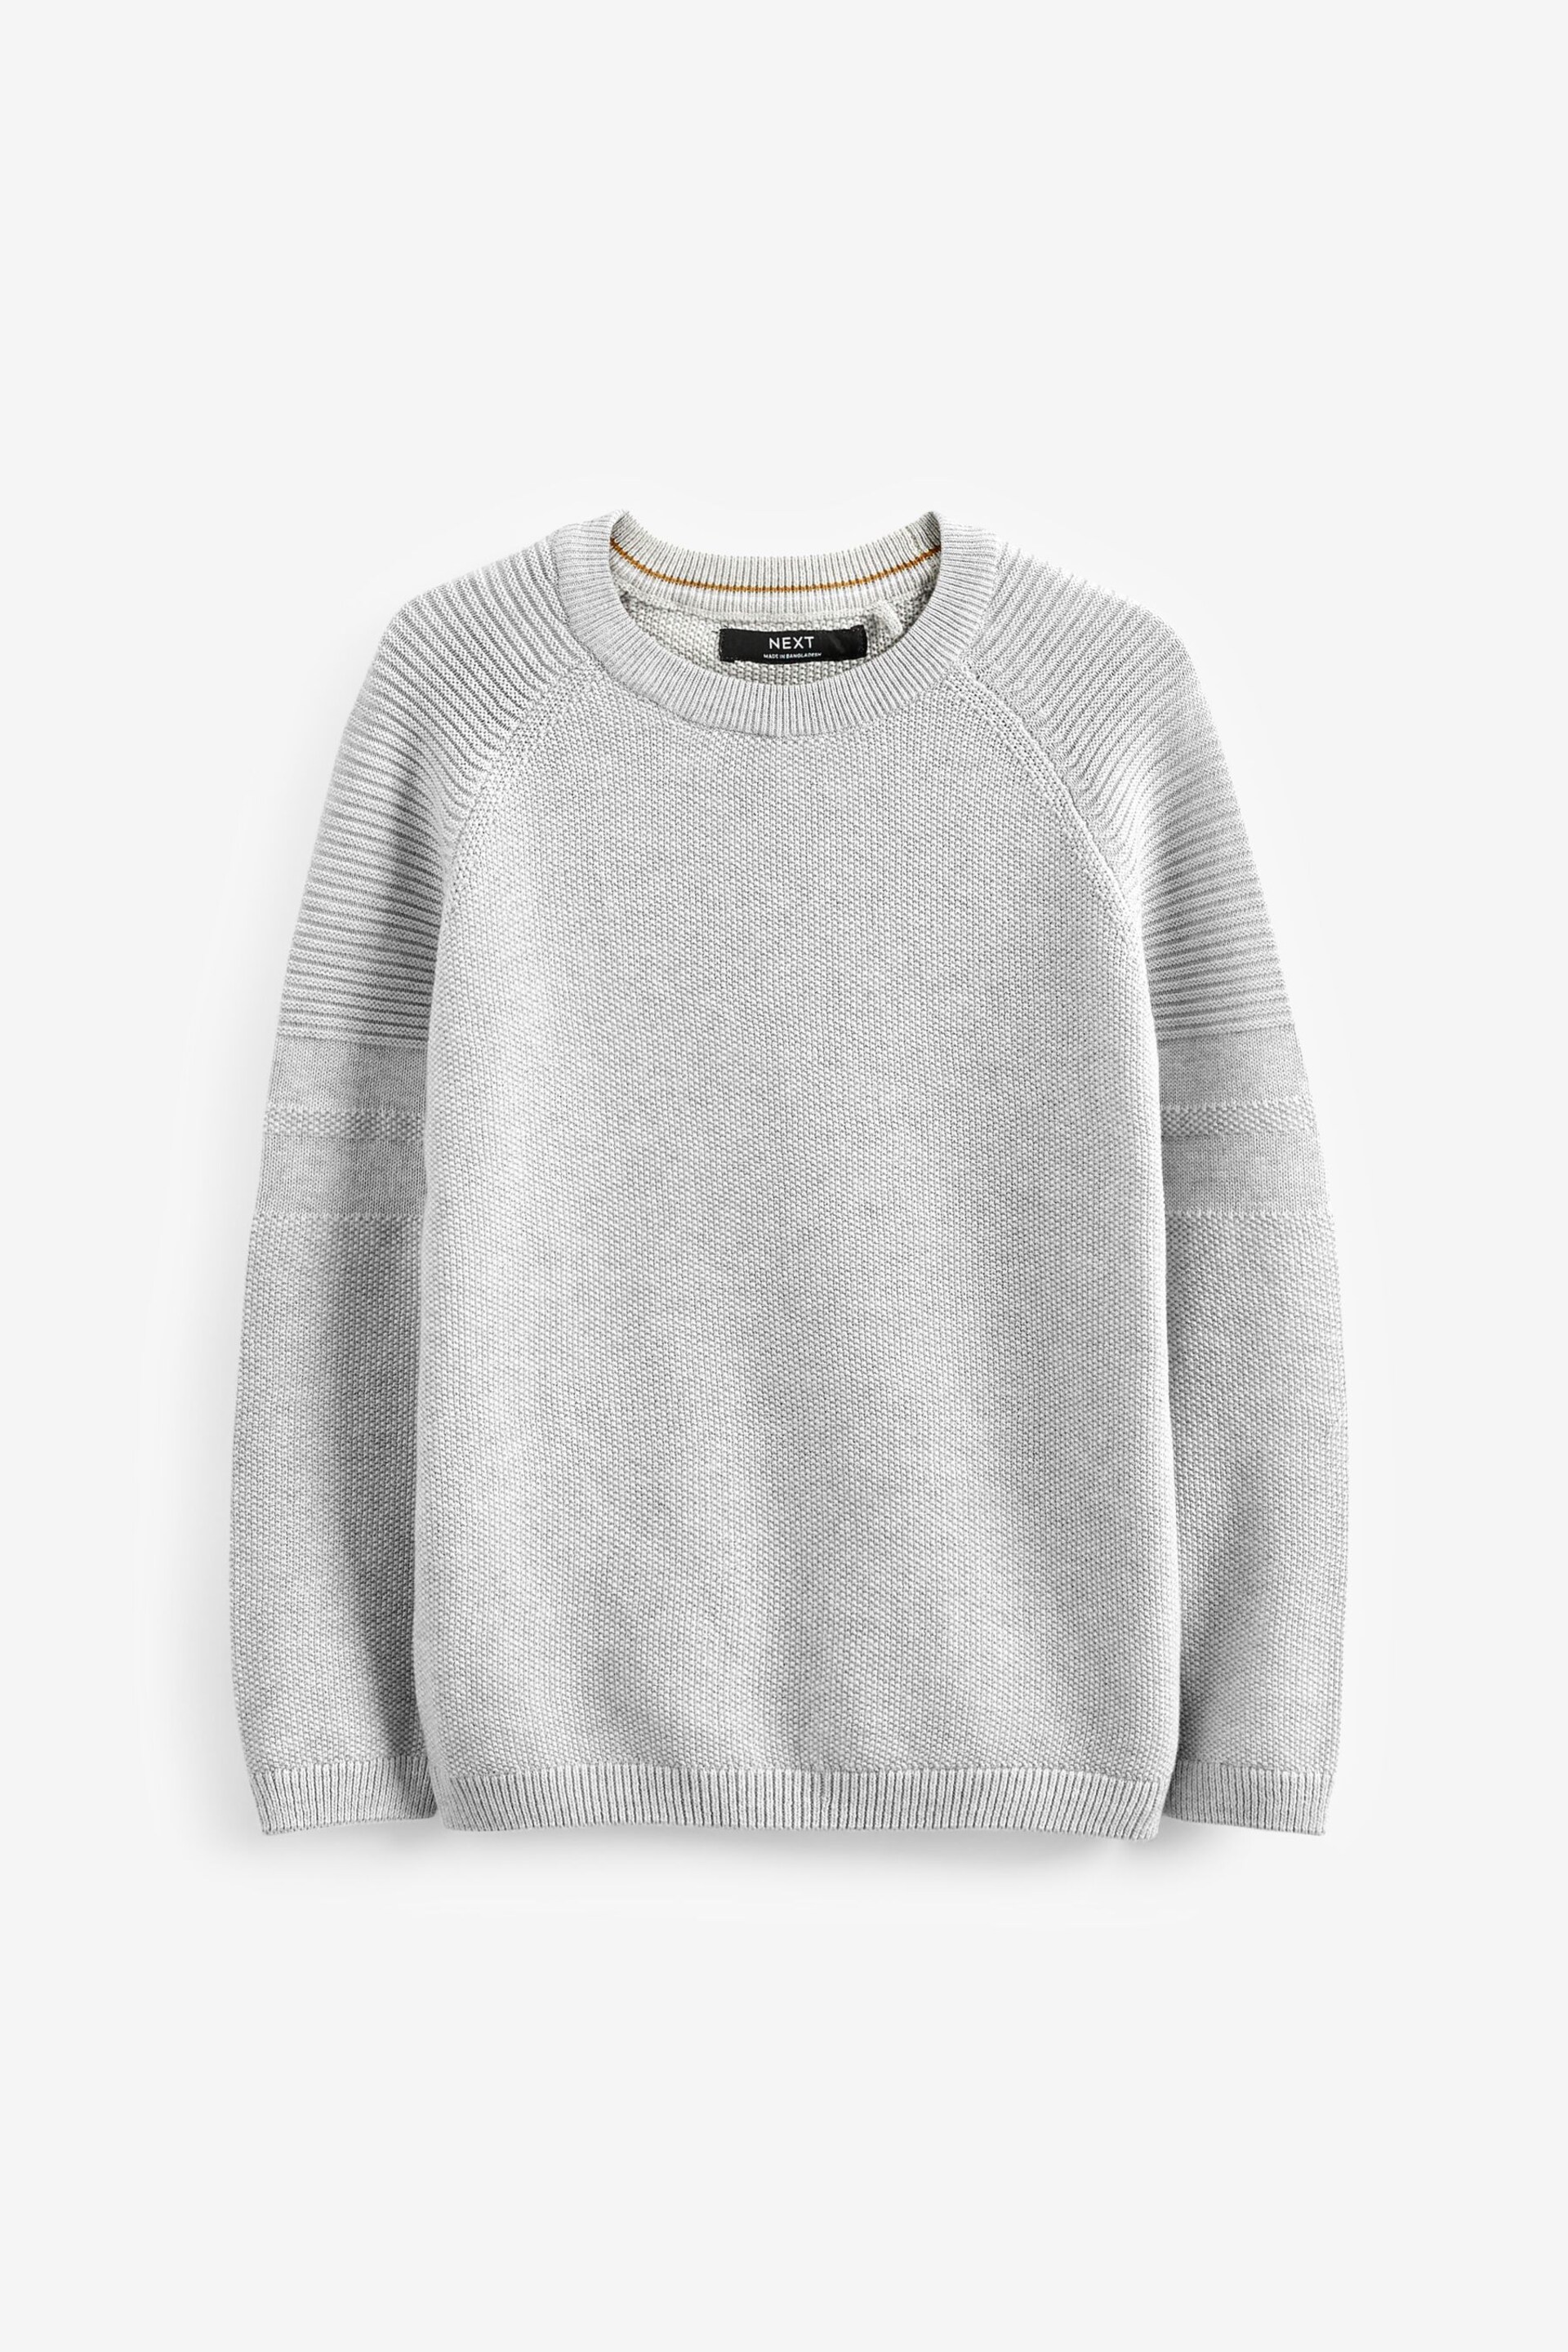 Grey Without Stag Textured Crew Jumper (3-16yrs) - Image 1 of 2